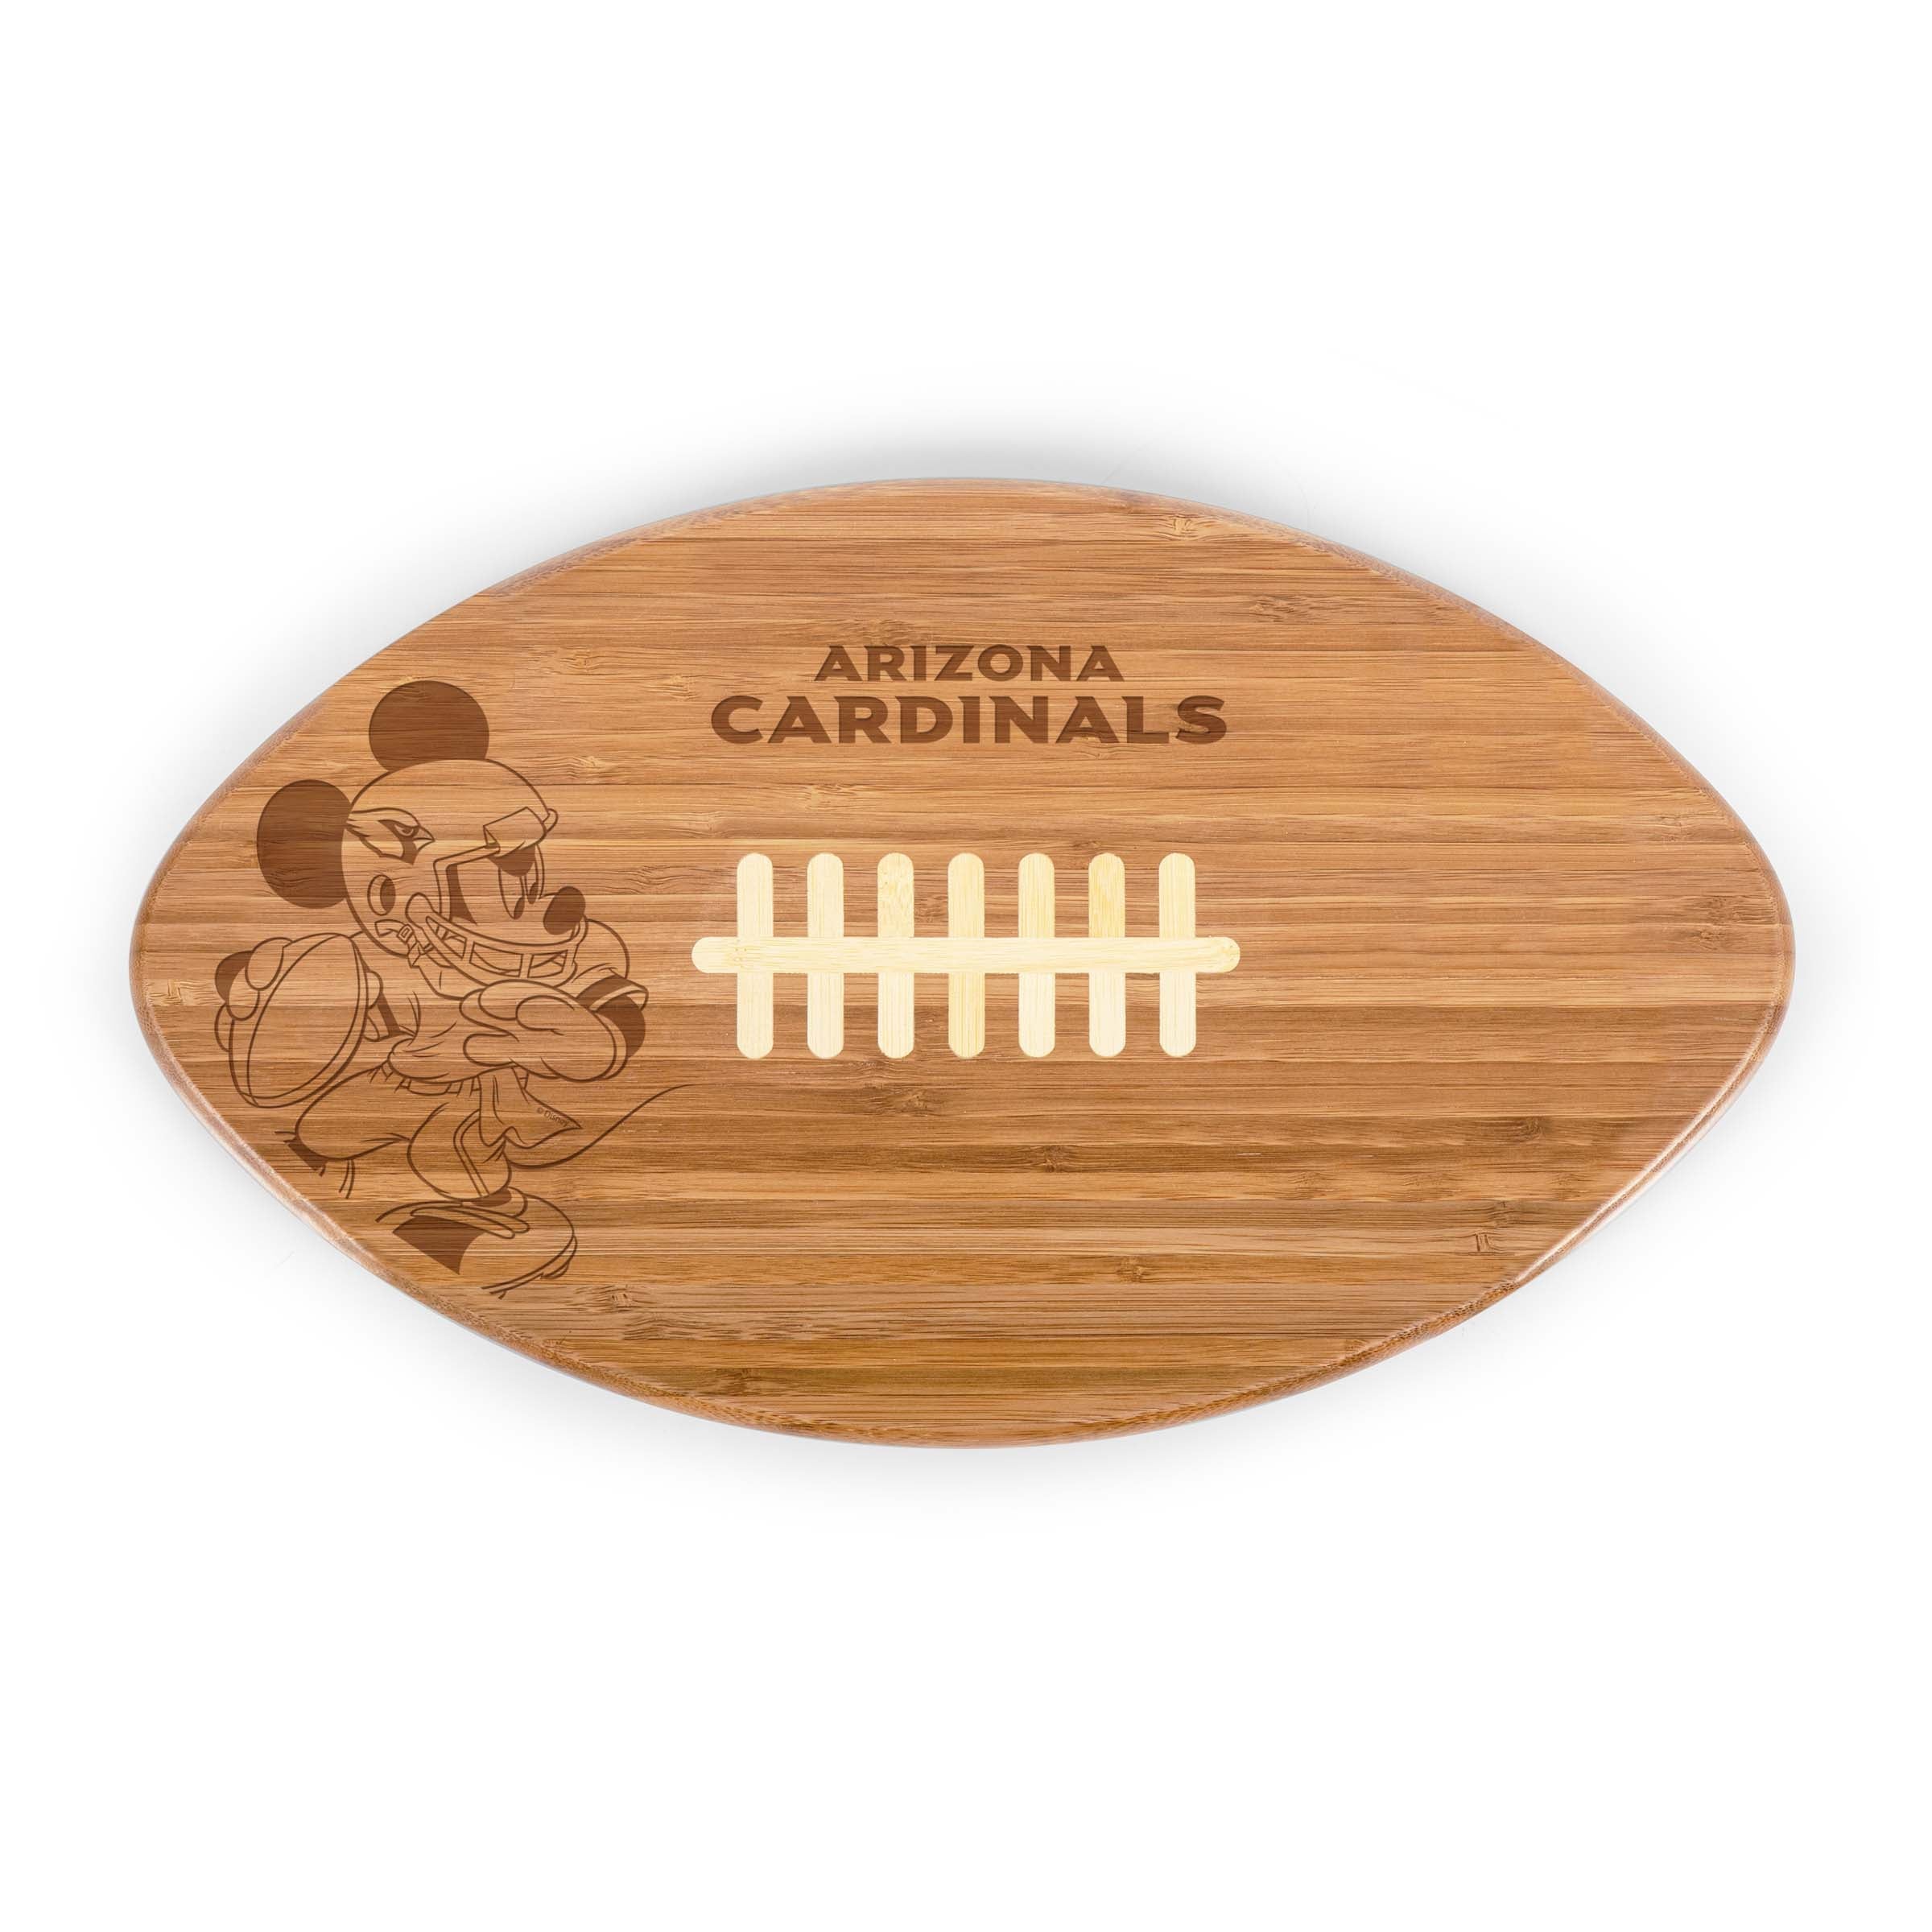 Arizona Cardinals Mickey Mouse - Touchdown! Football Cutting Board & Serving Tray